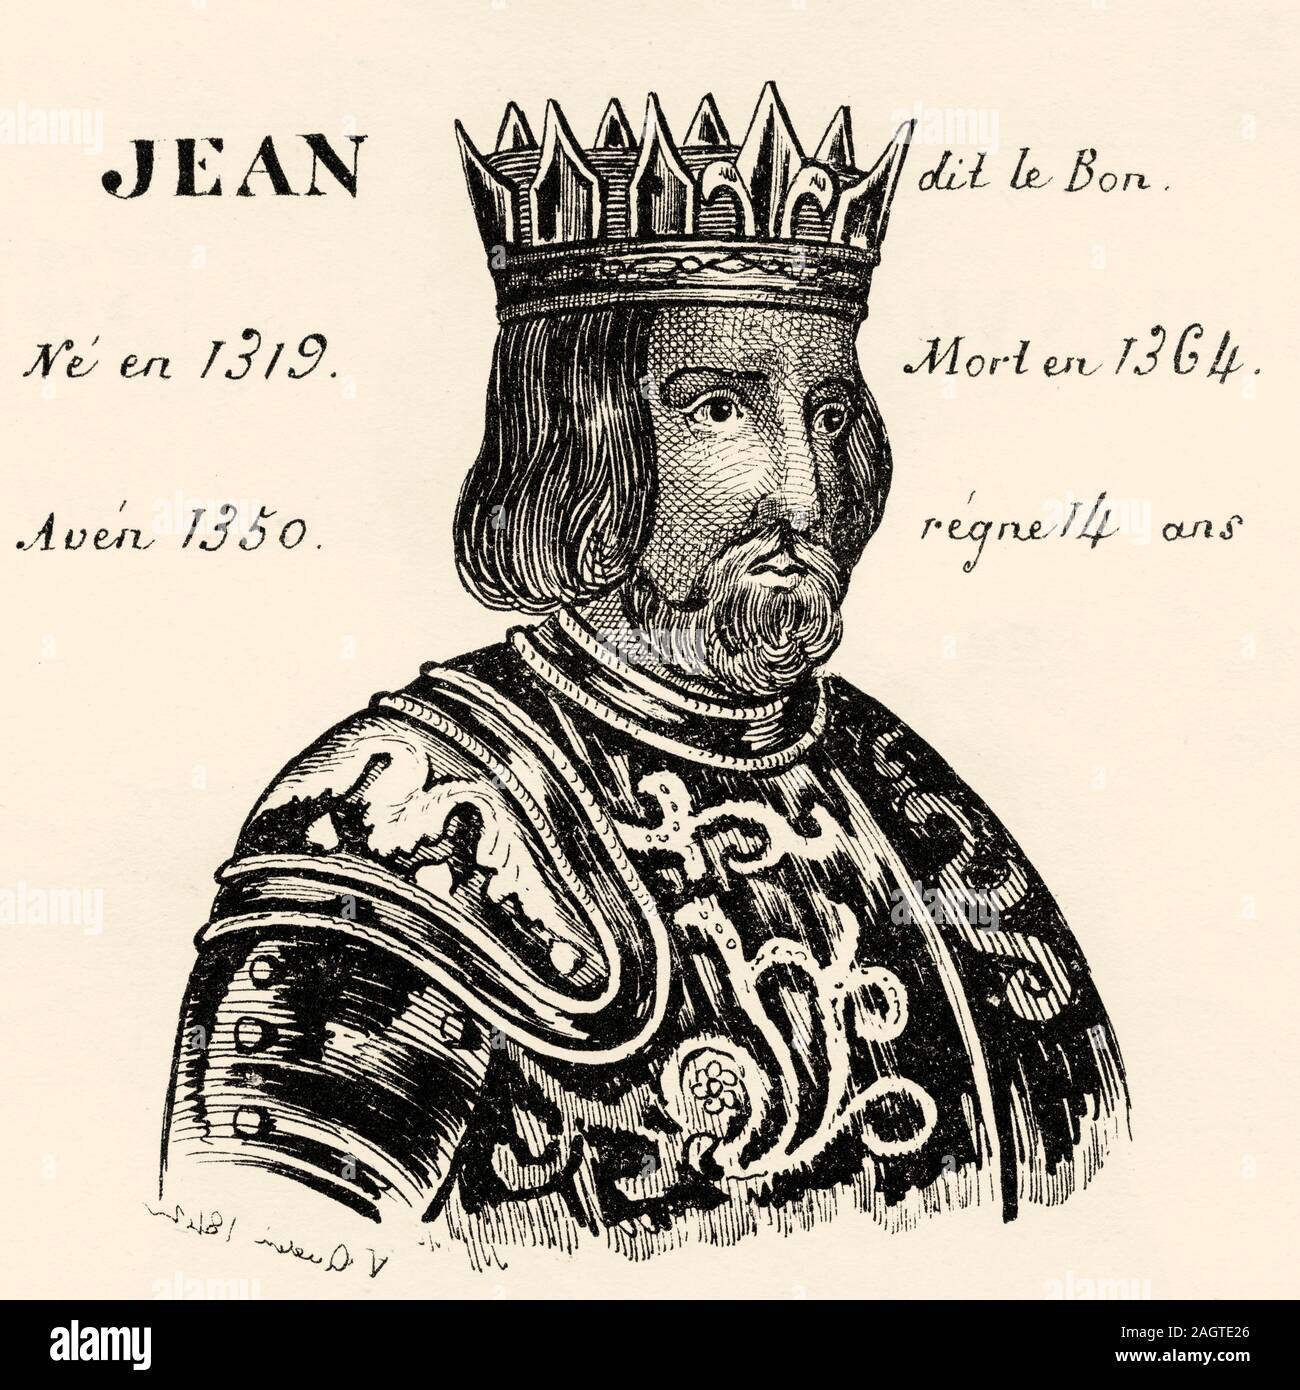 Portrait of Jean the Good (1319 - 1364). King of France from 1350 to 1364. House of Valois. History of France, from the book Atlas de la France 1842 Stock Photo